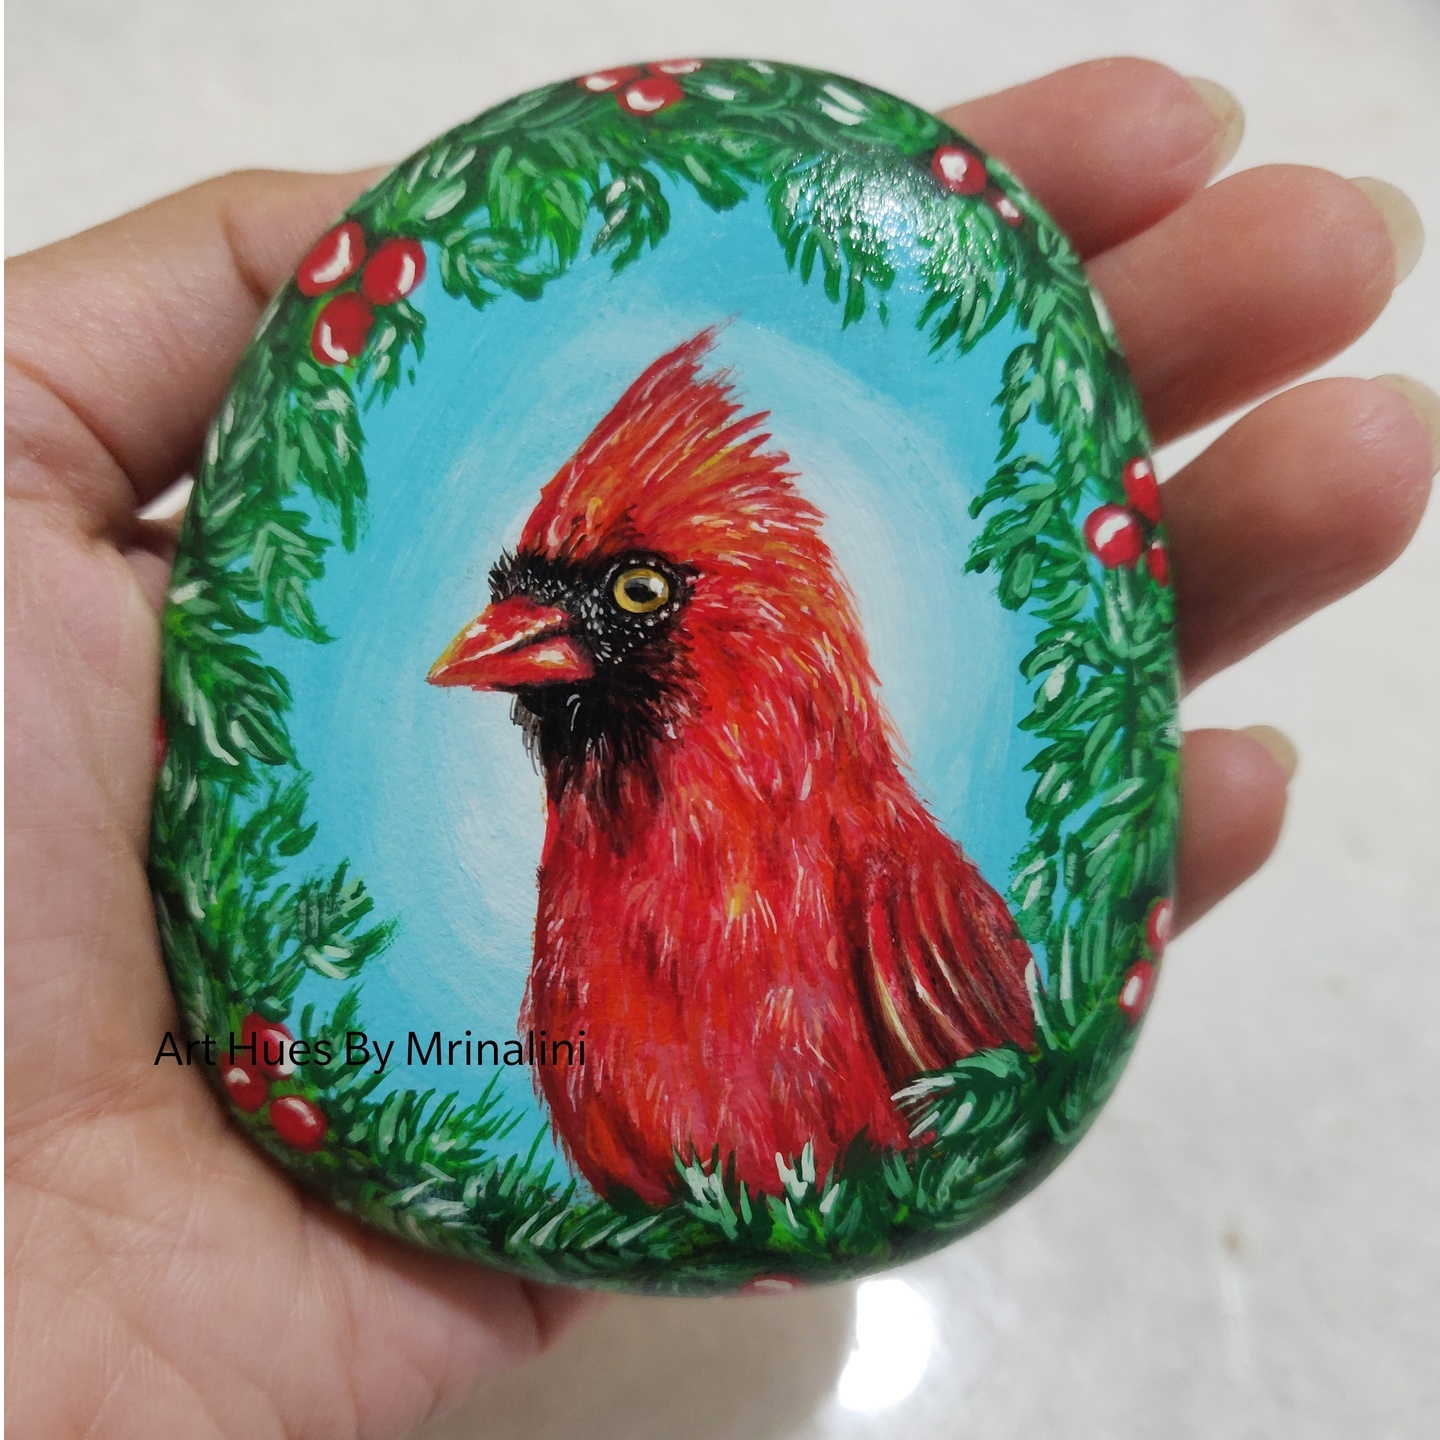 Christmas Cardinal bird hand painted rock, Christmas wreath unique gift, Home decor, Collectible, painted stone, Bird acrylic painting